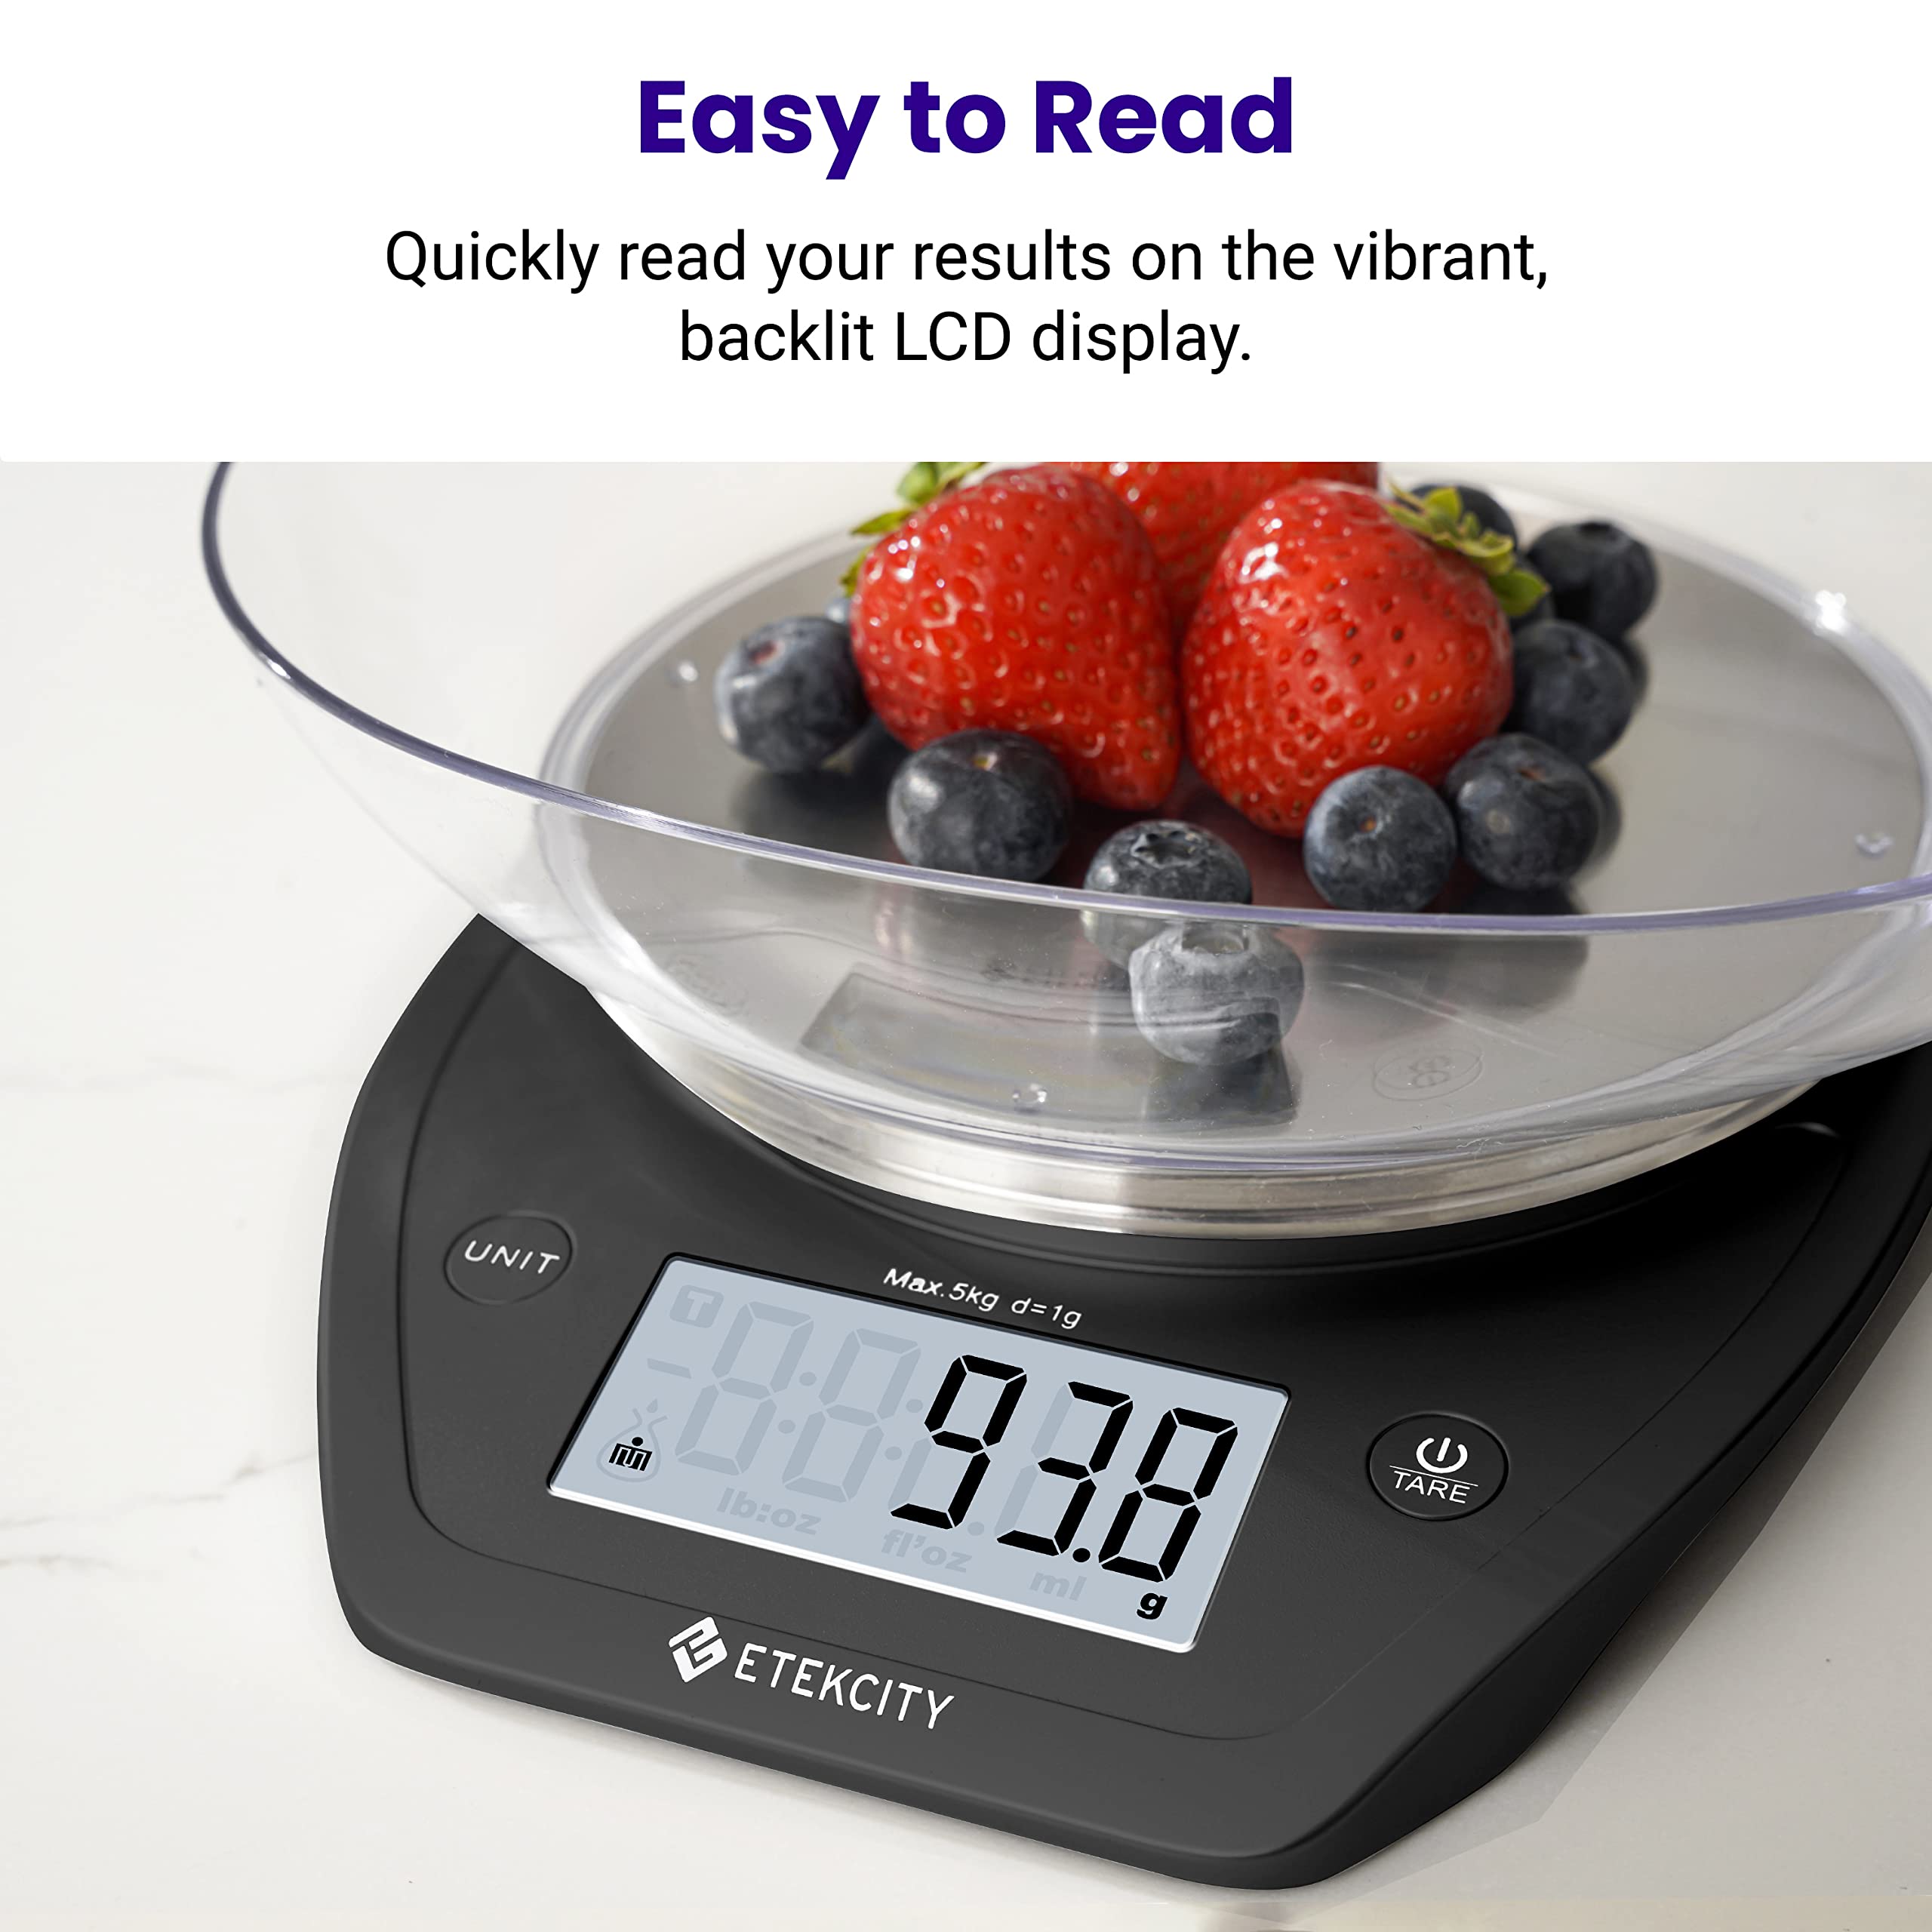 Etekcity 0.1g Food Scale, Bowl, Digital Grams and Ounces for Weight Loss, Dieting, Baking, Cooking, and Meal Prep, 11lb/5kg, Stainless Steel Black